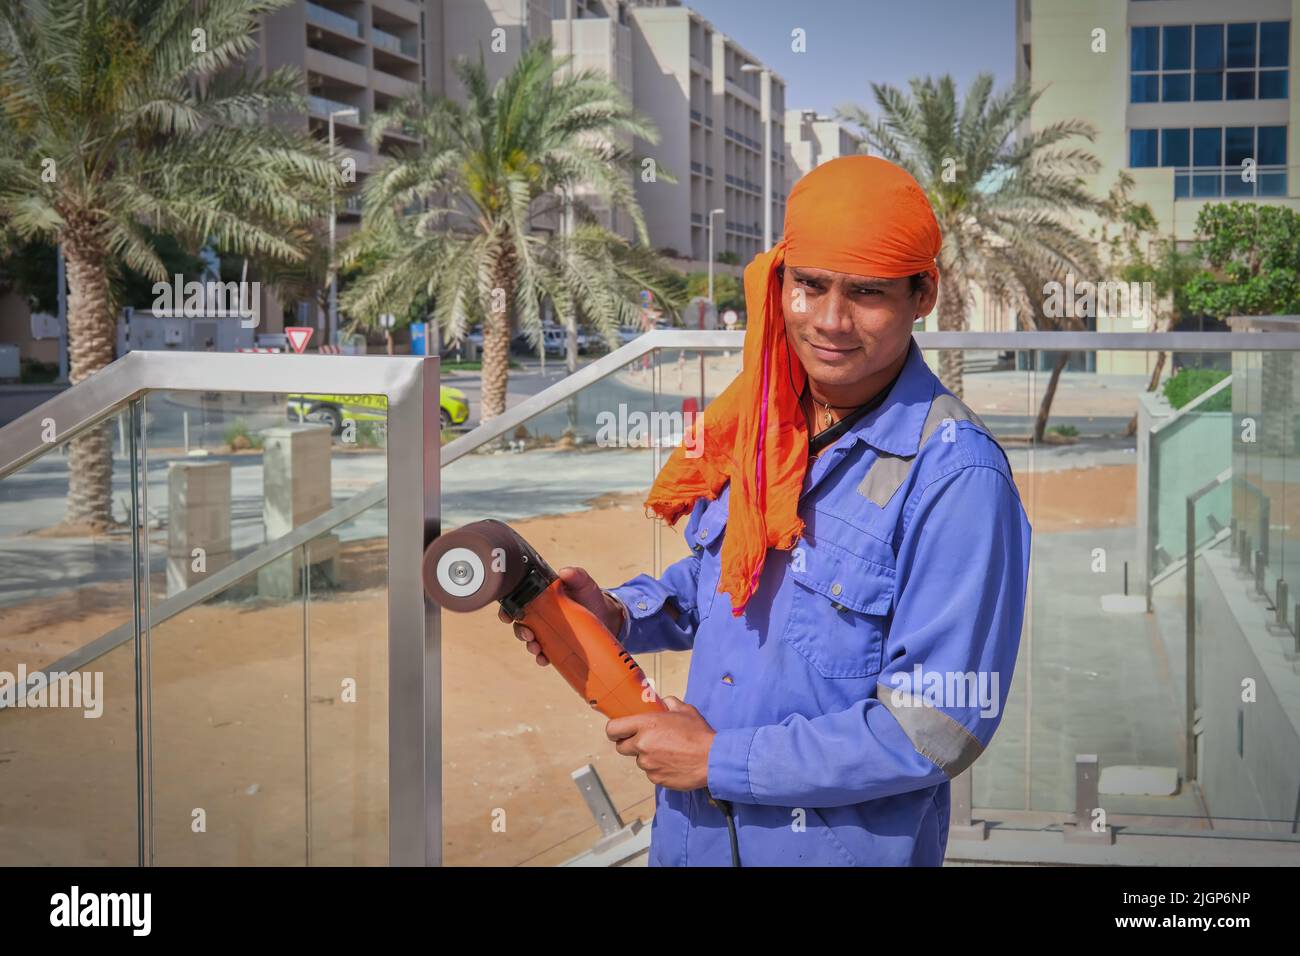 Portrait of young middle eastern street worker man wearing blue uniform and orange headdress with burnishing polishing tool in hands .UAE Stock Photo